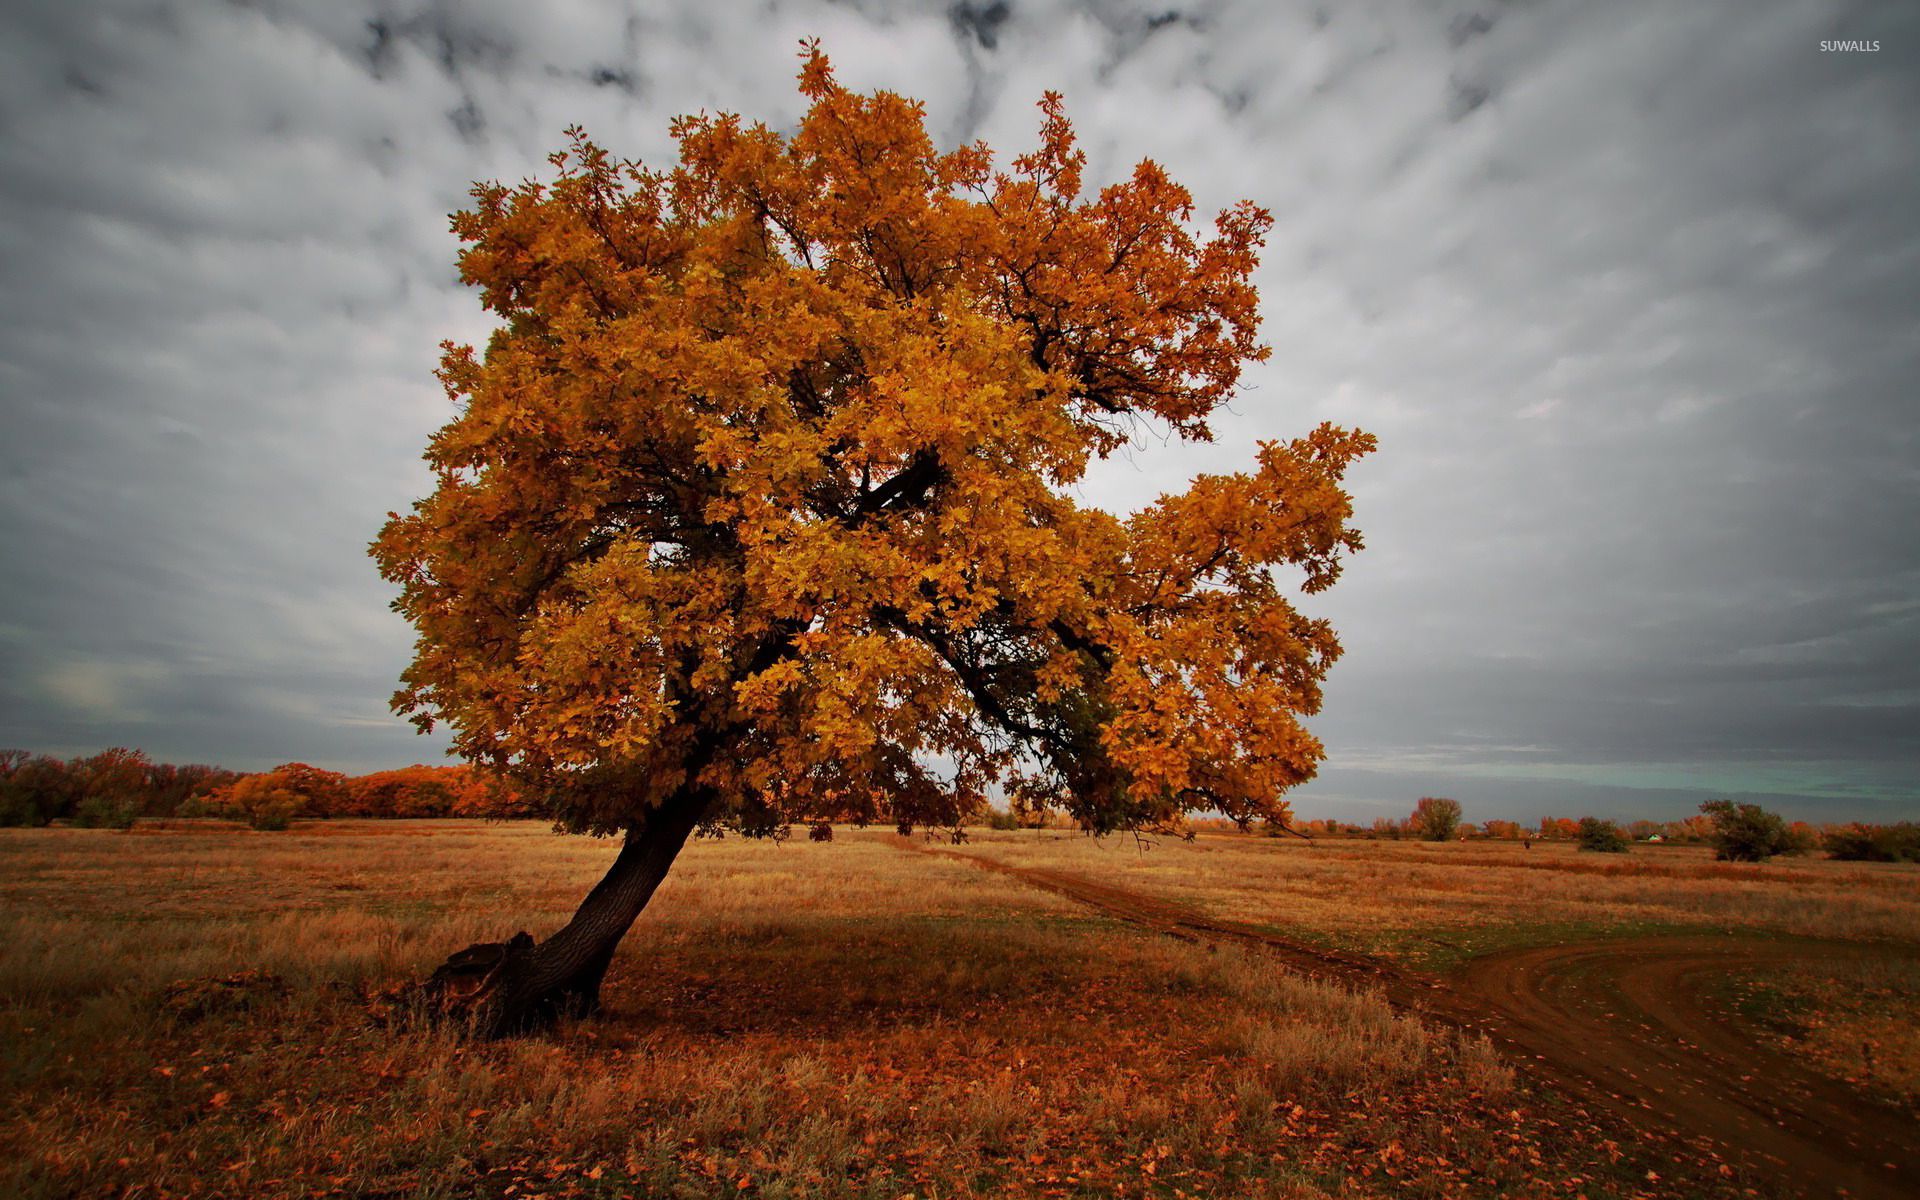 Tree in Autumn wallpaper - Nature wallpapers - #15368 | Painting ...